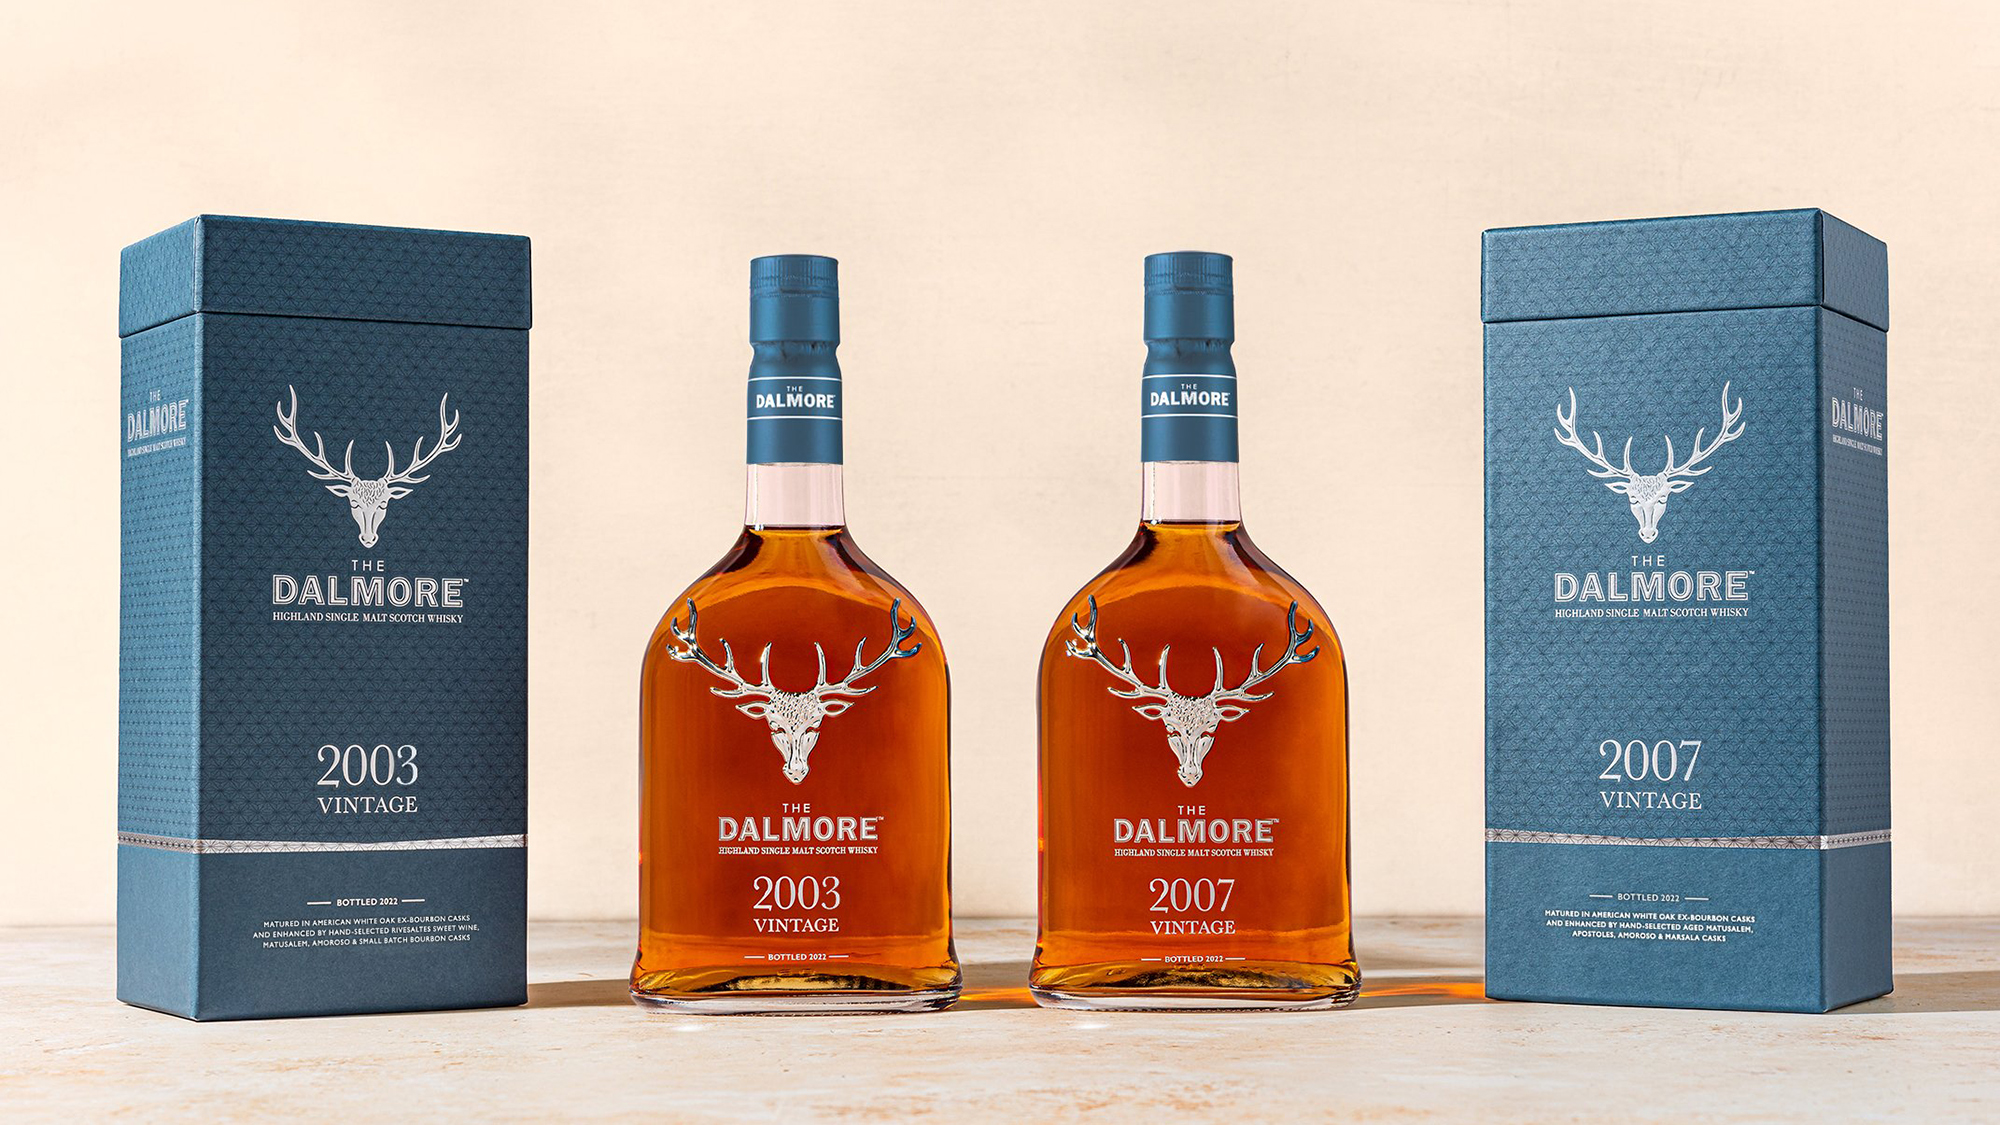 Dalmore 2003 And 2007 Vintage Whiskies Join Vintage Collection bottle box